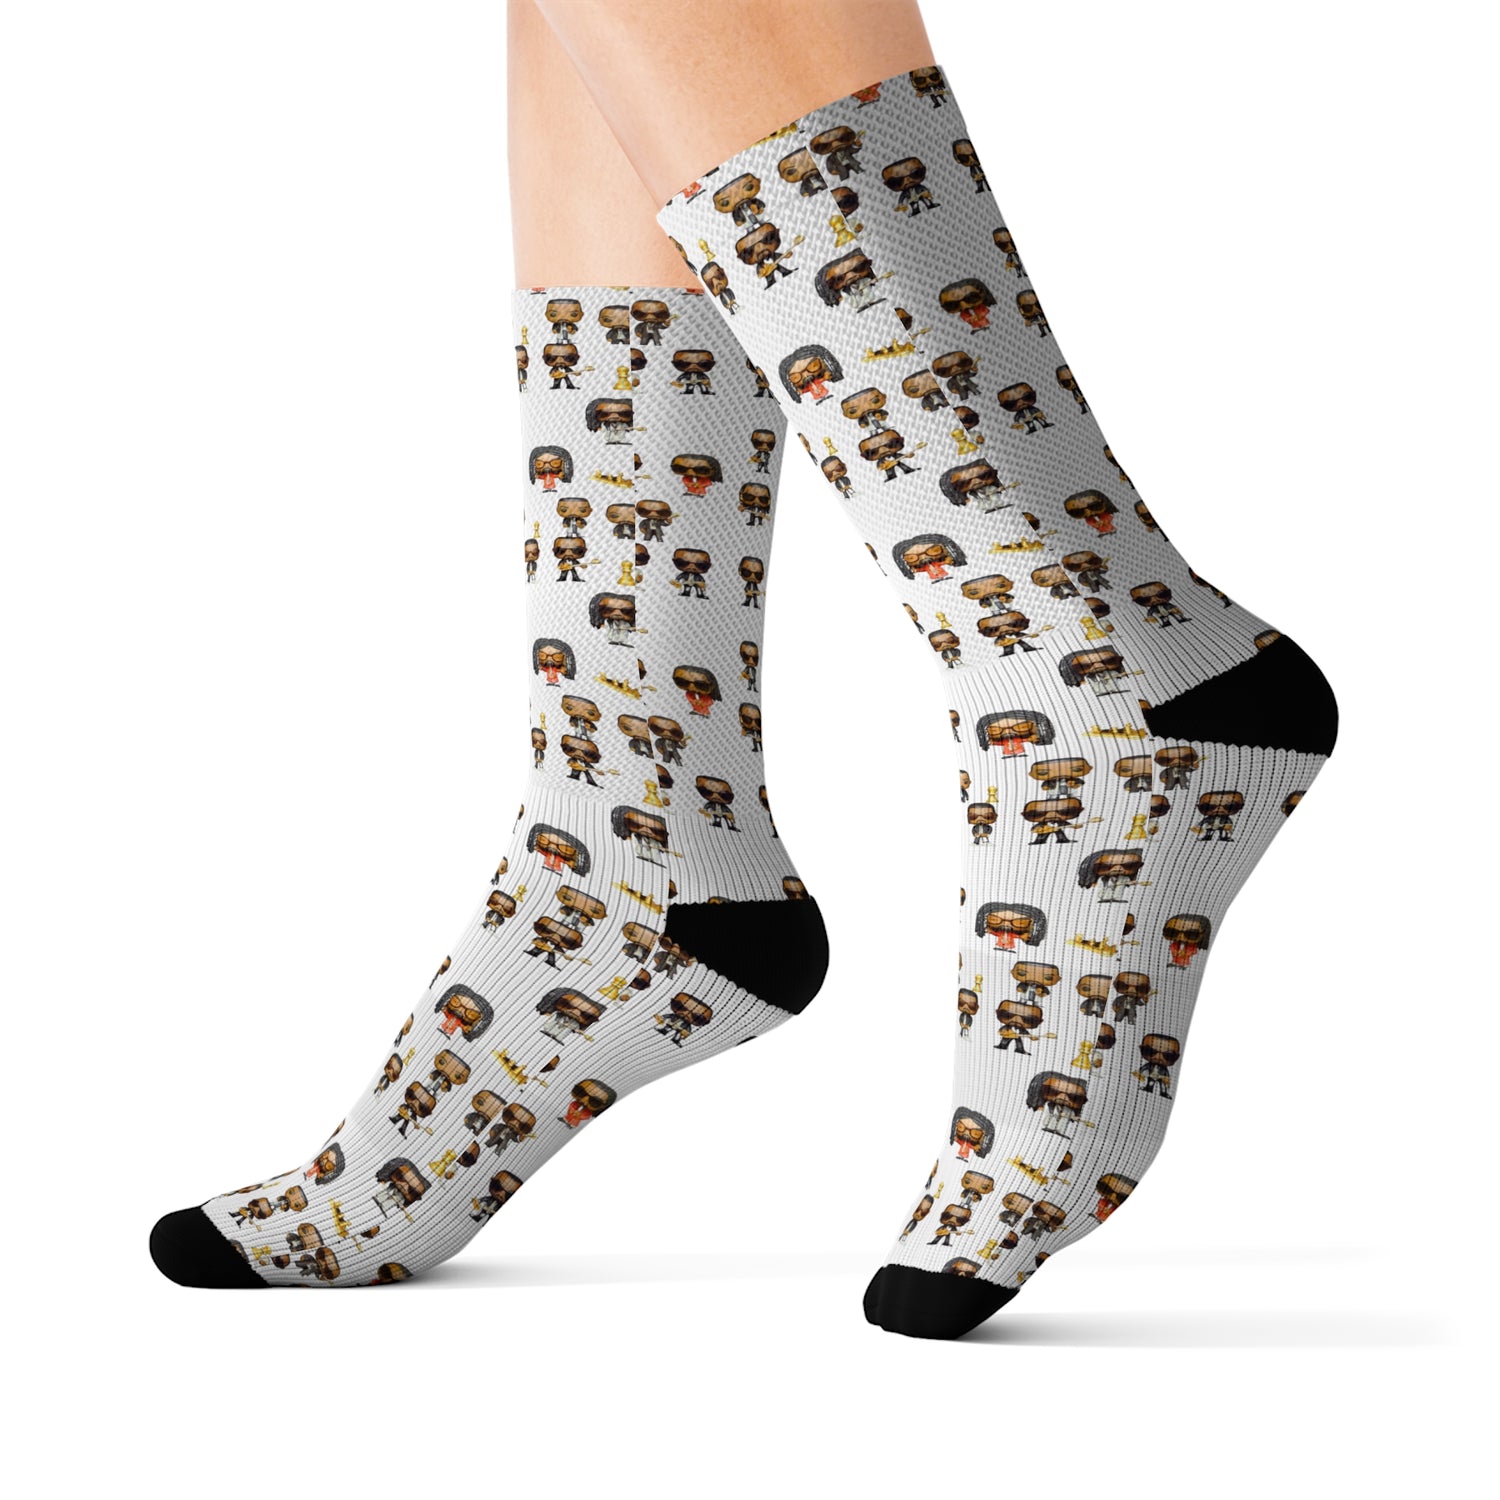 Sublimation Socks From Rich and Rich Homeopportunities L.L.C.